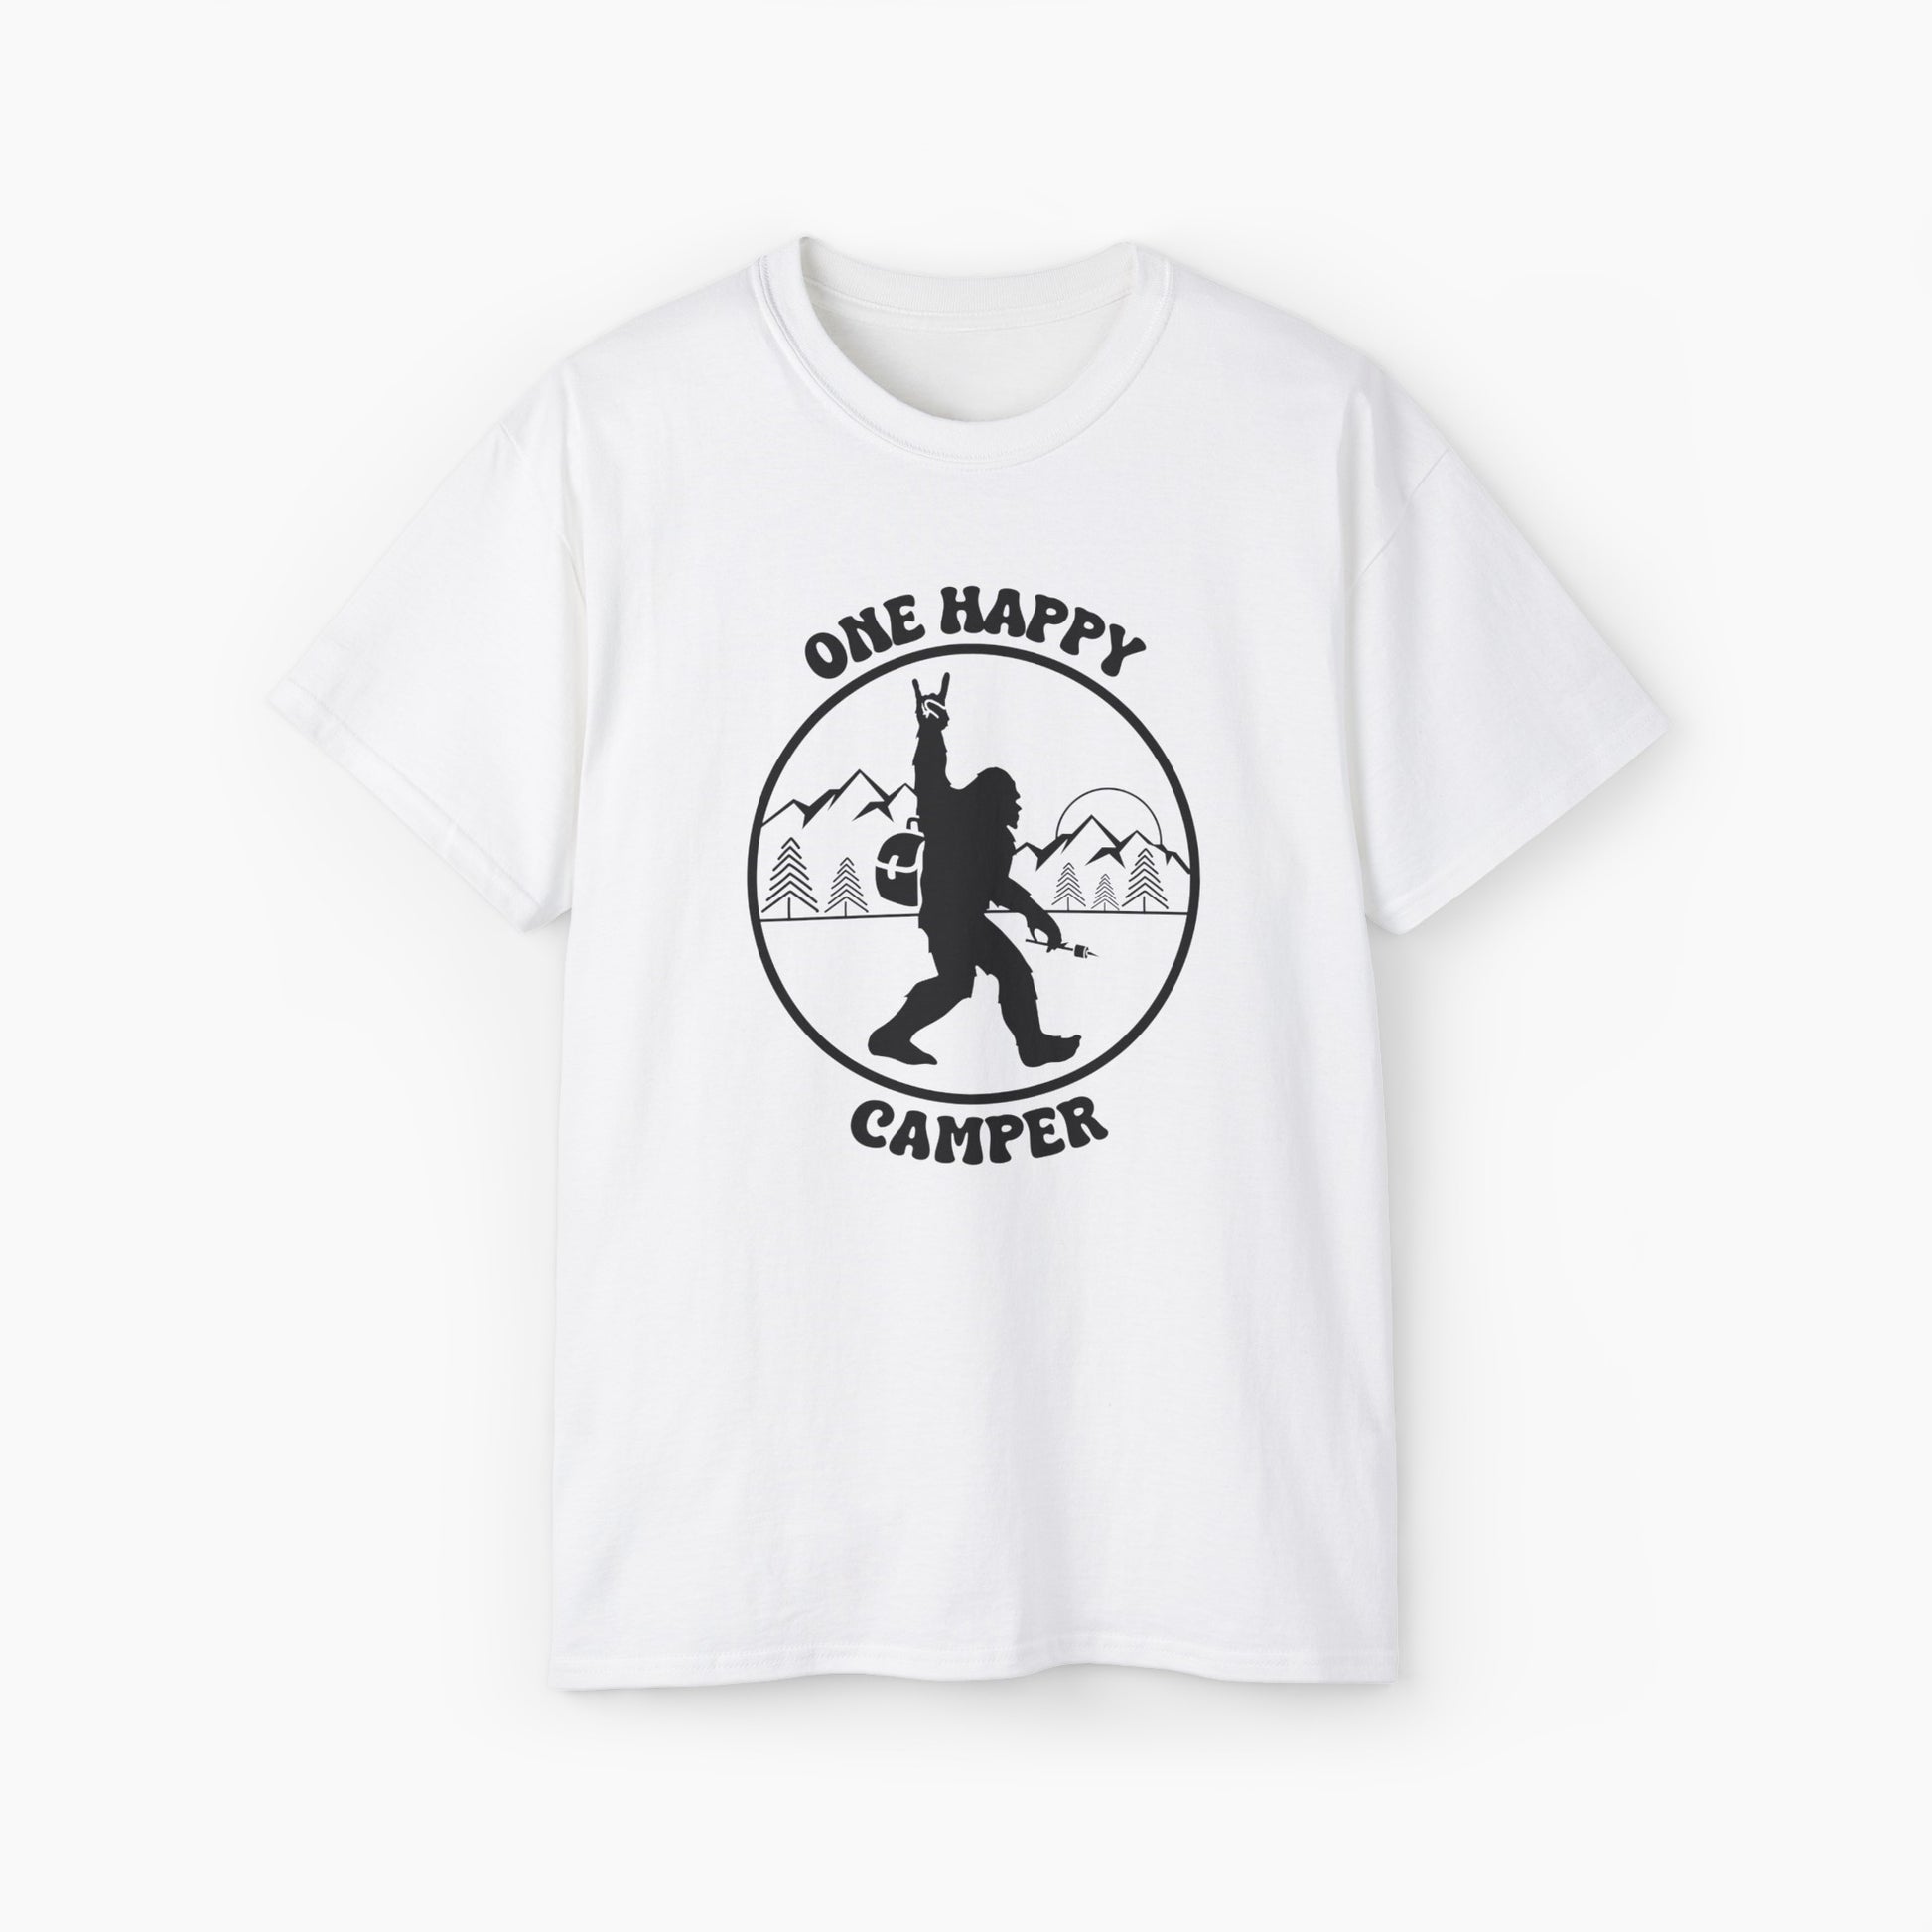 White t-shirt with 'One Happy Camper' text, featuring Bigfoot making a peace sign, set against a subtle background of trees and mountains.